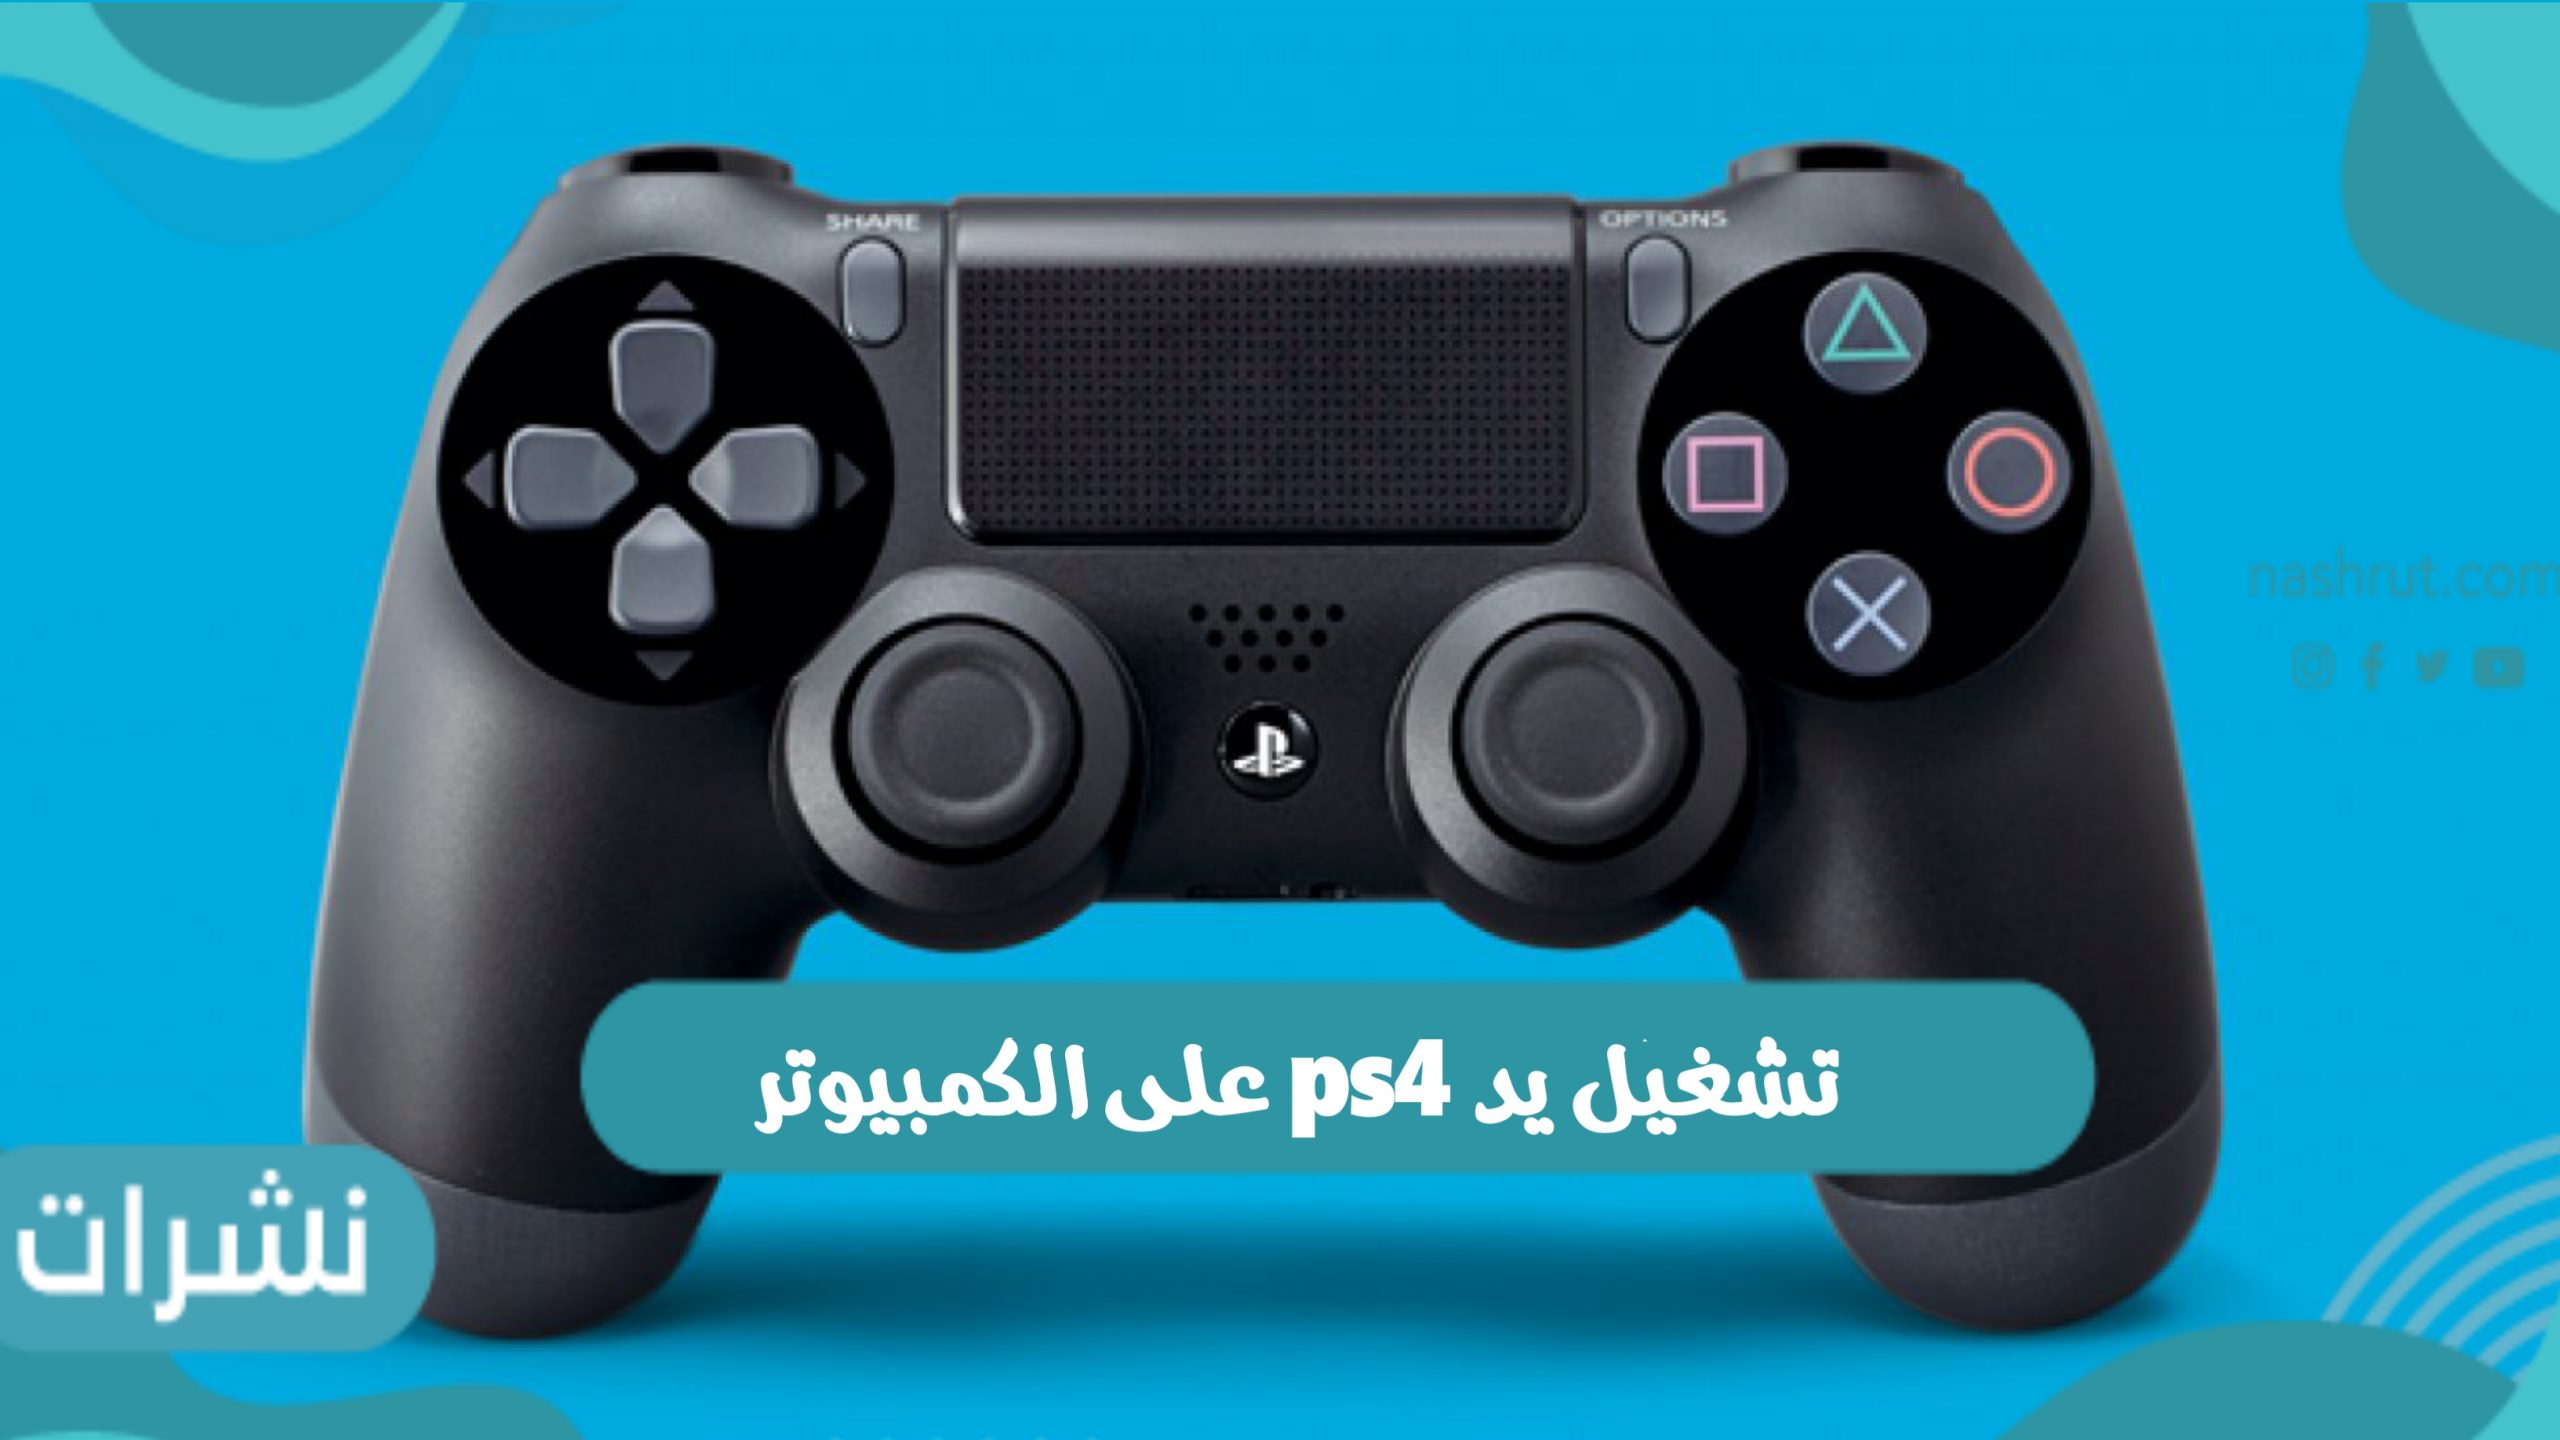 Ps na. Control (ps4). Джойстик ps4 Dualshock PUBG. Ps4 Controller CTR. Кнопка share Dualshock 4.